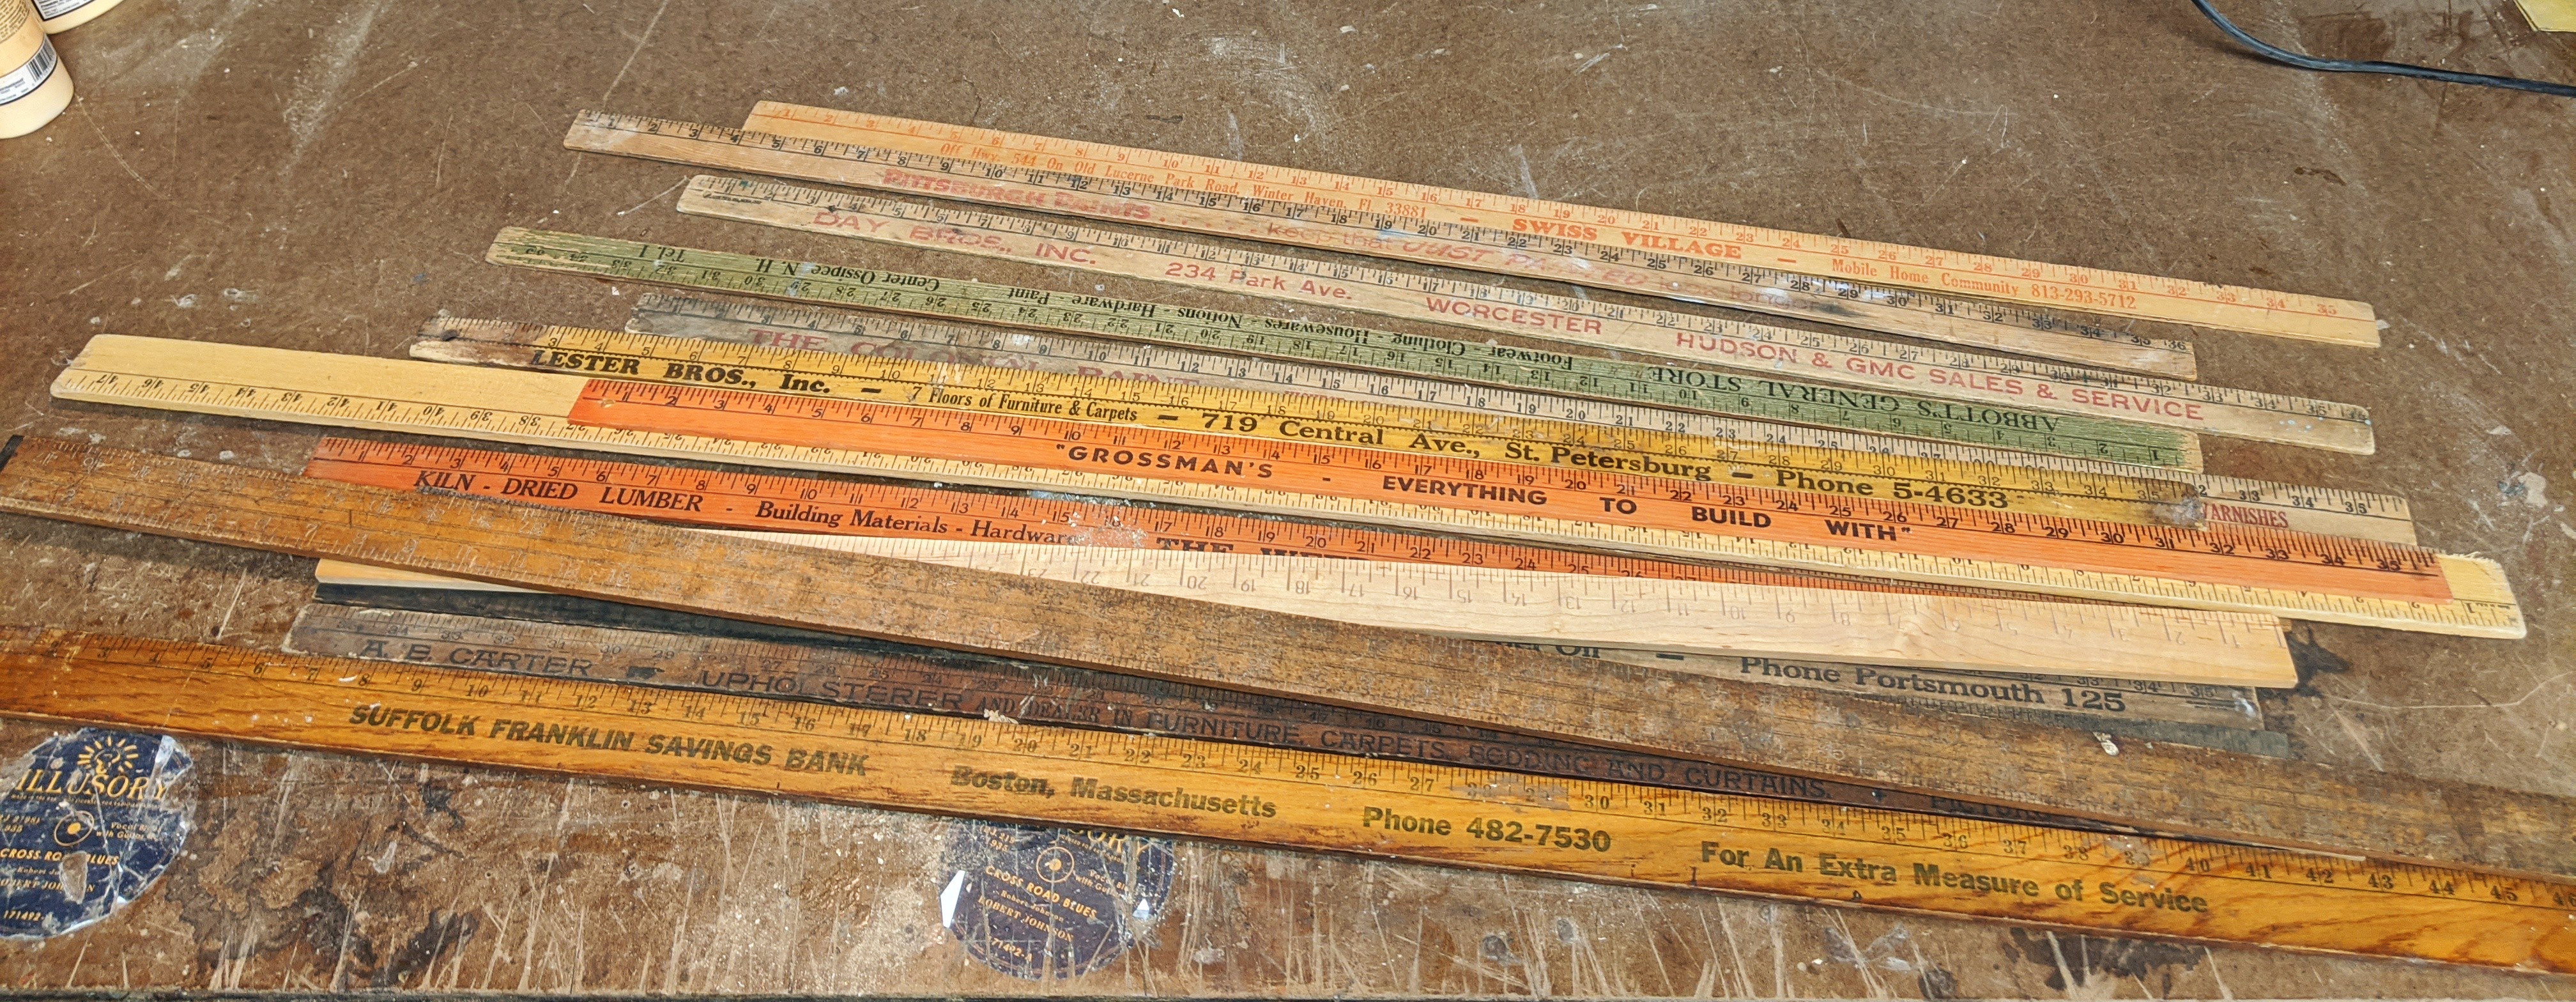 The starting point - a pile of old wooden yardsticks